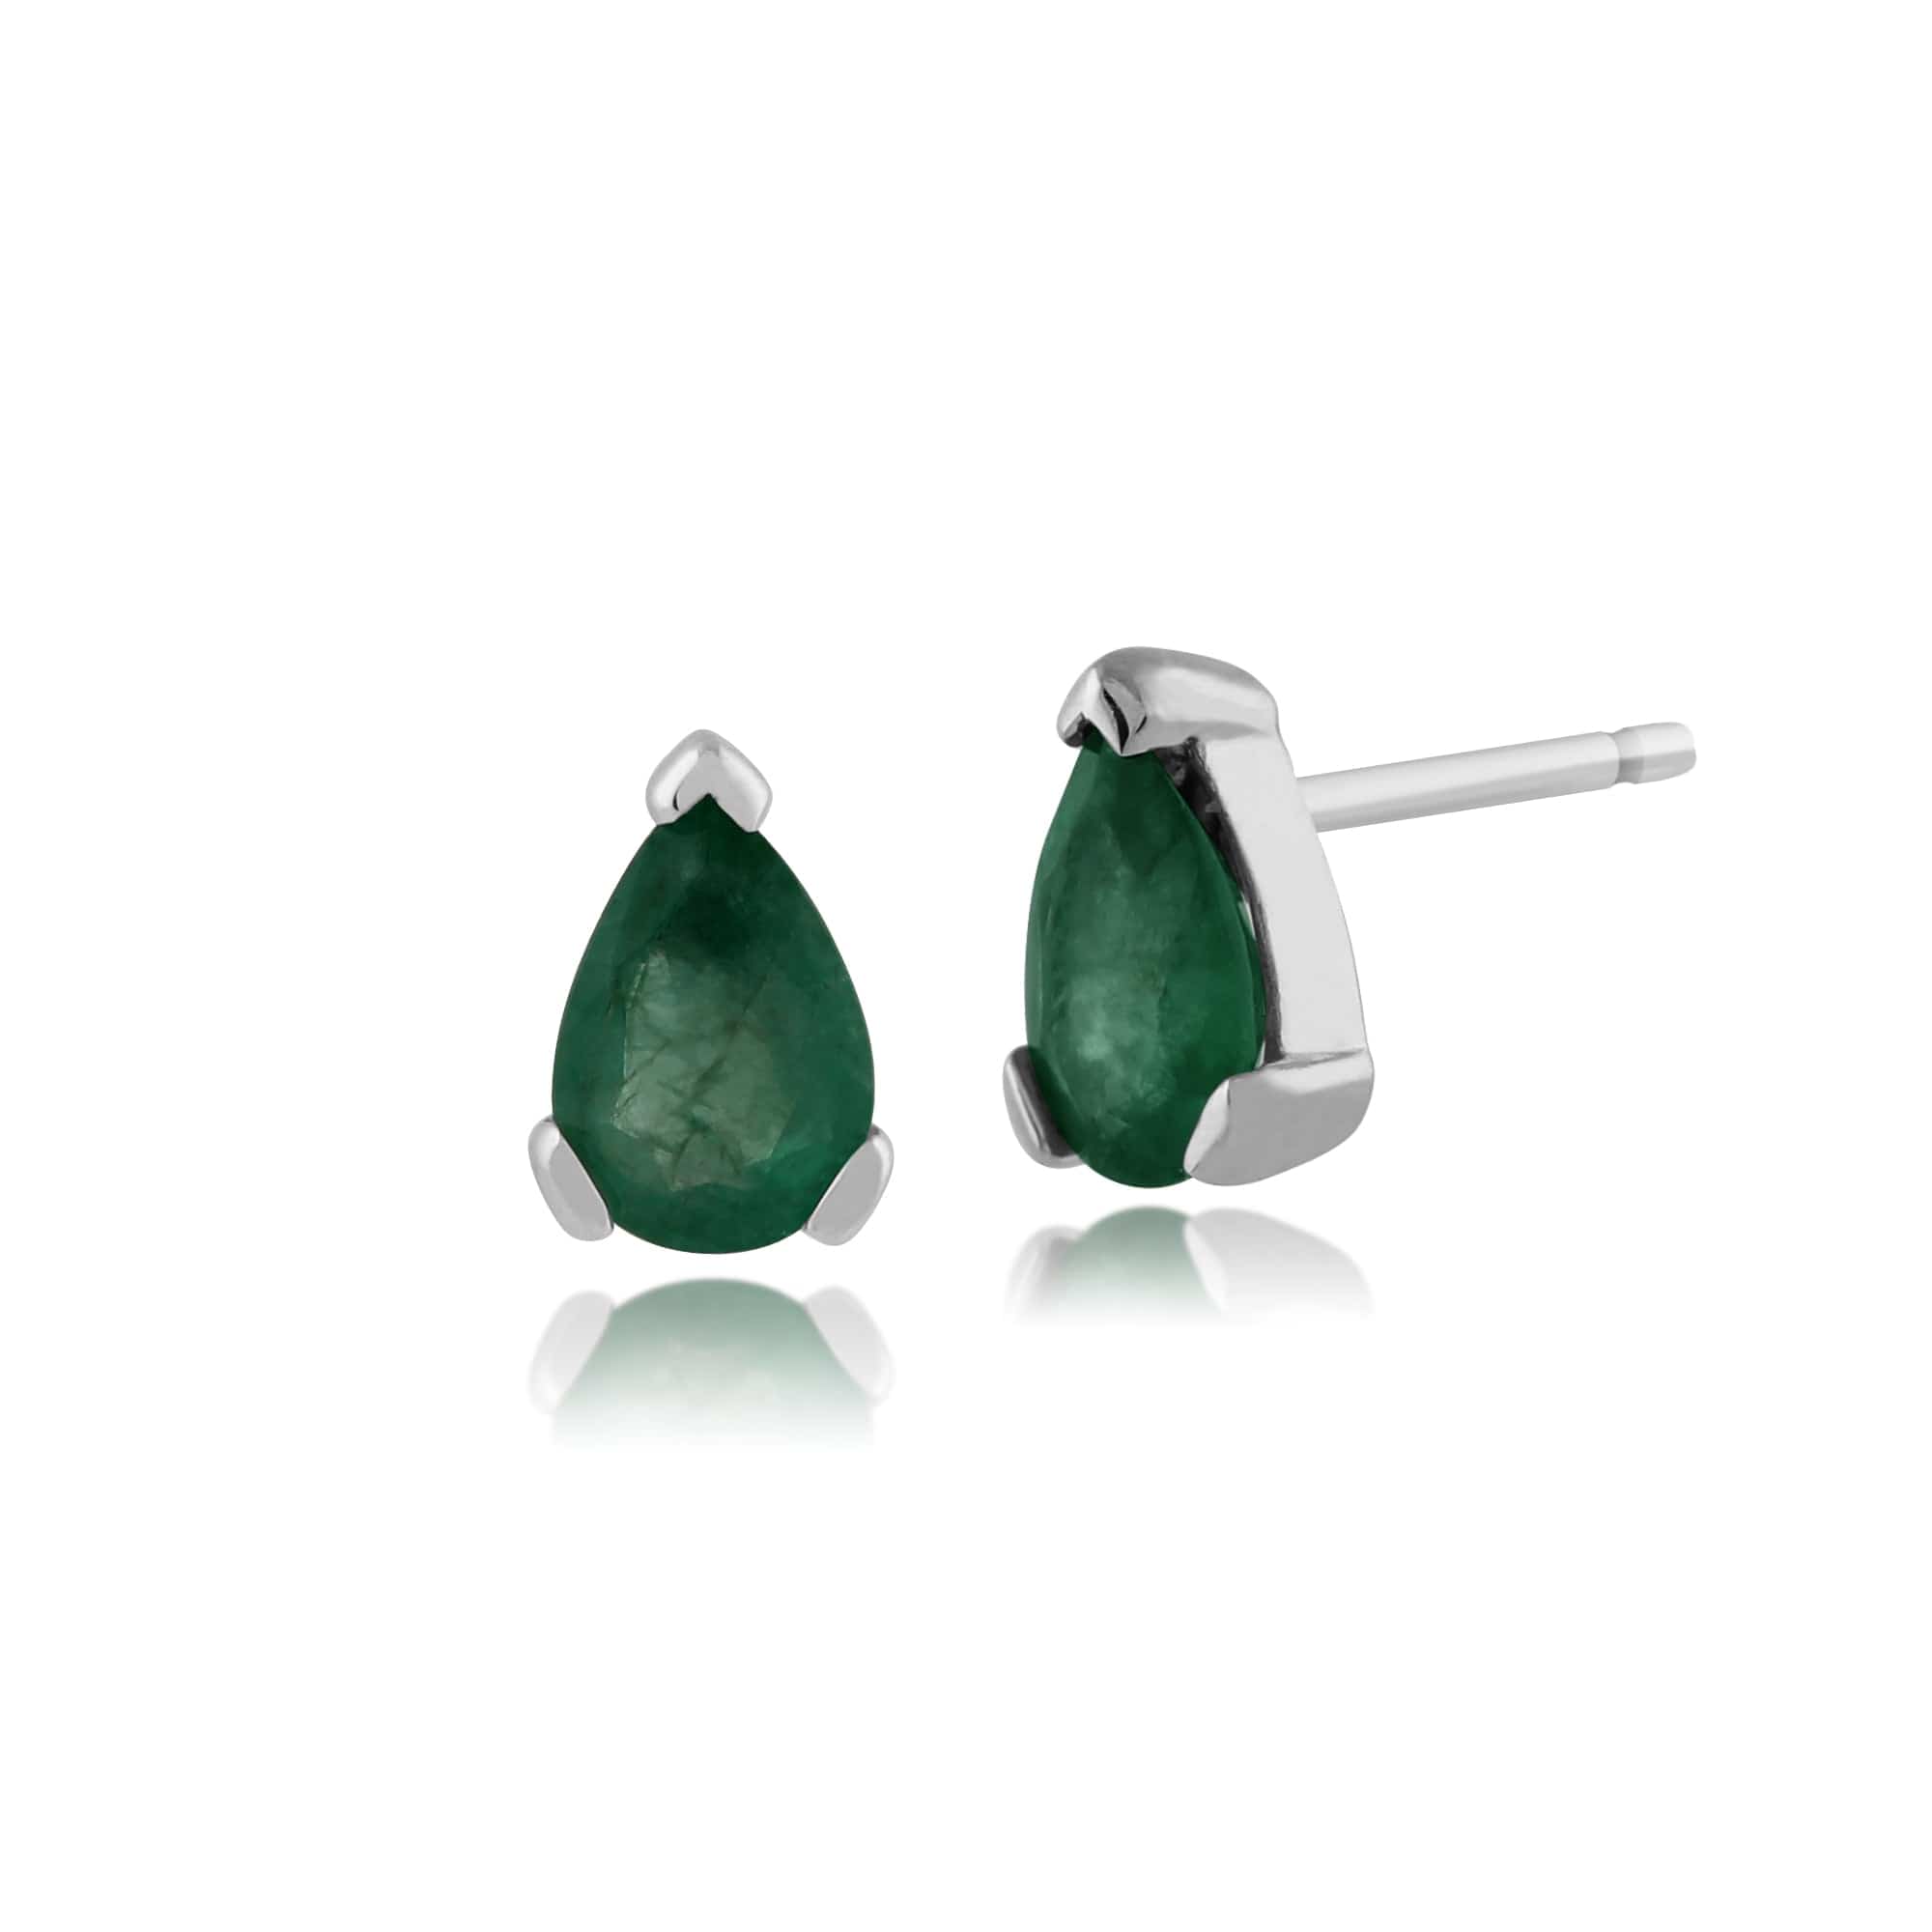 Classic Pear Emerald Stud Earrings in 9ct White Gold 6.5mmx4mm - Gemondo